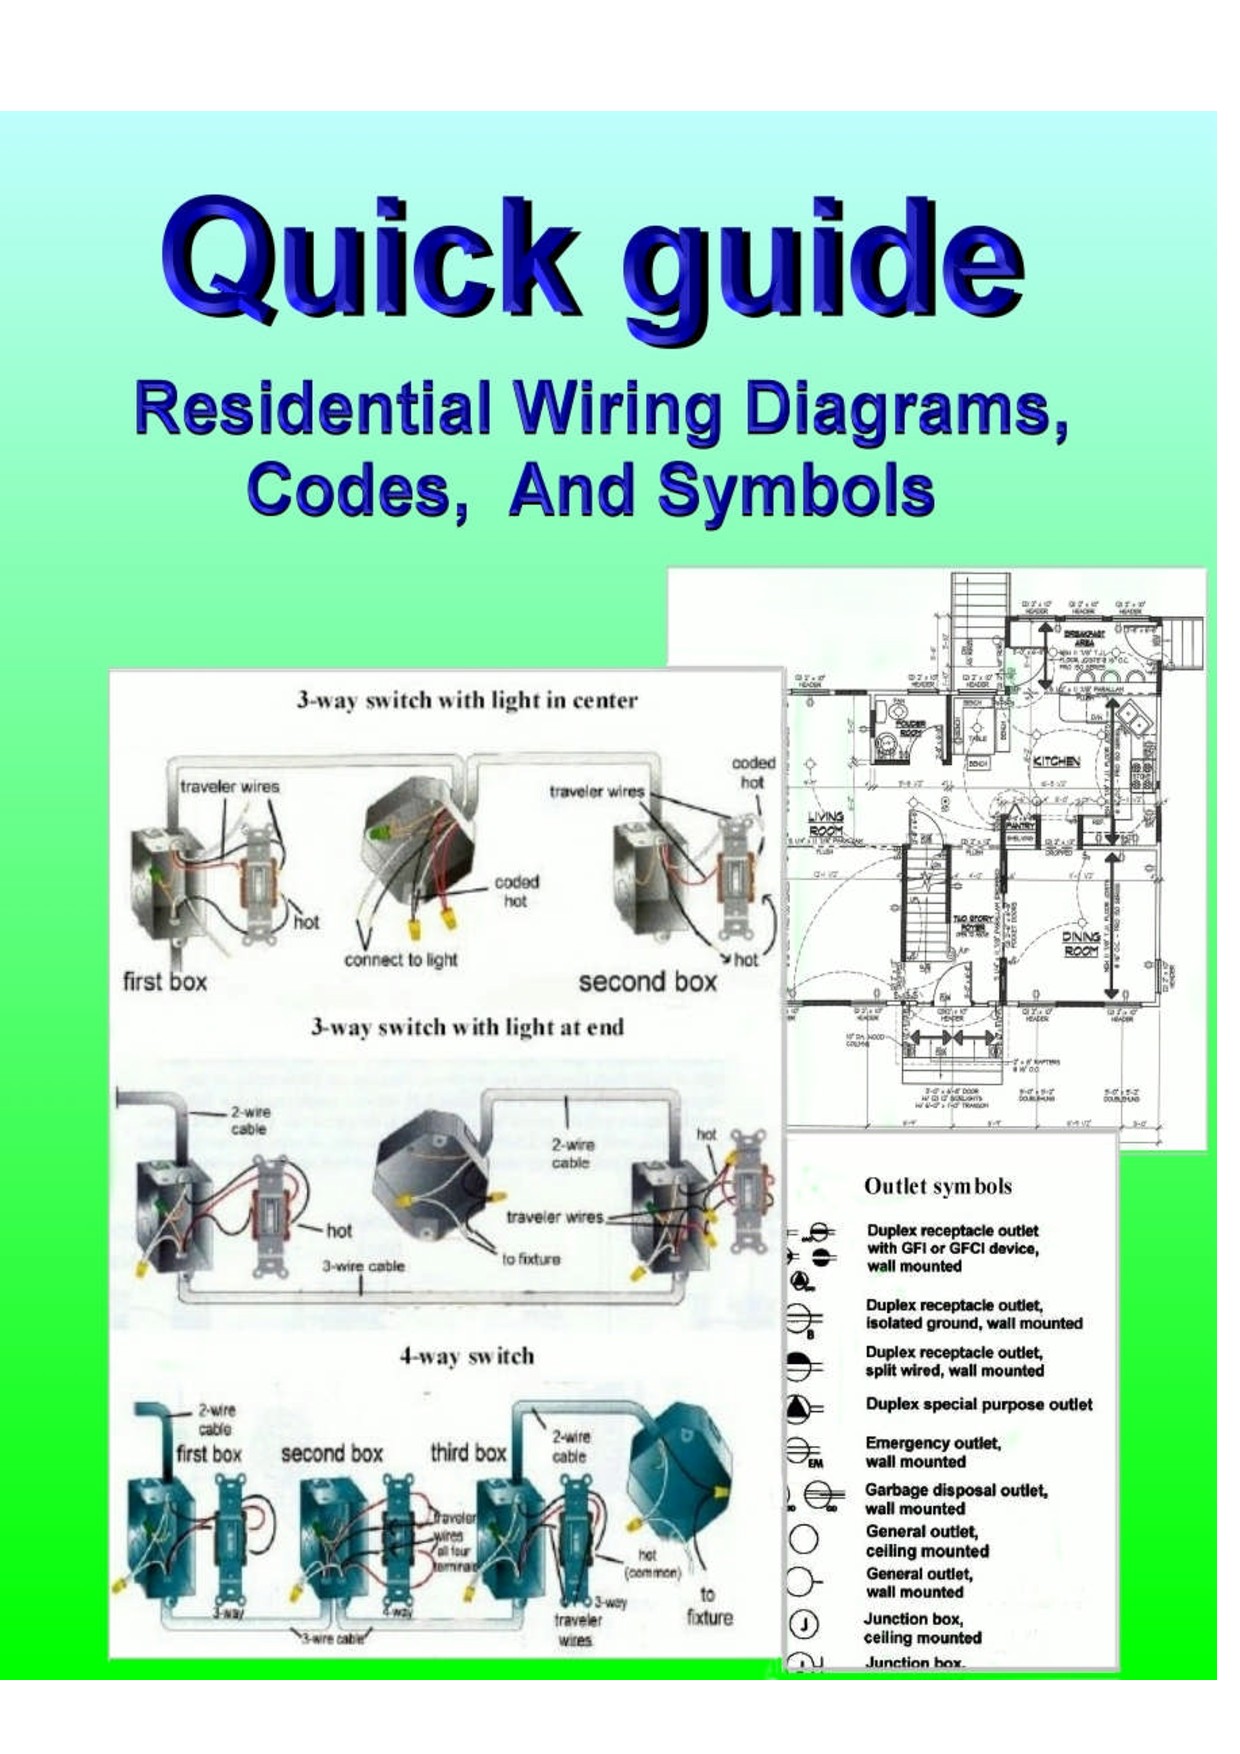 Home Electrical Wiring Diagrams pdf Download legal documents 39 pages with many diagrams and illustrations A step by step home wiring guide with diagrams